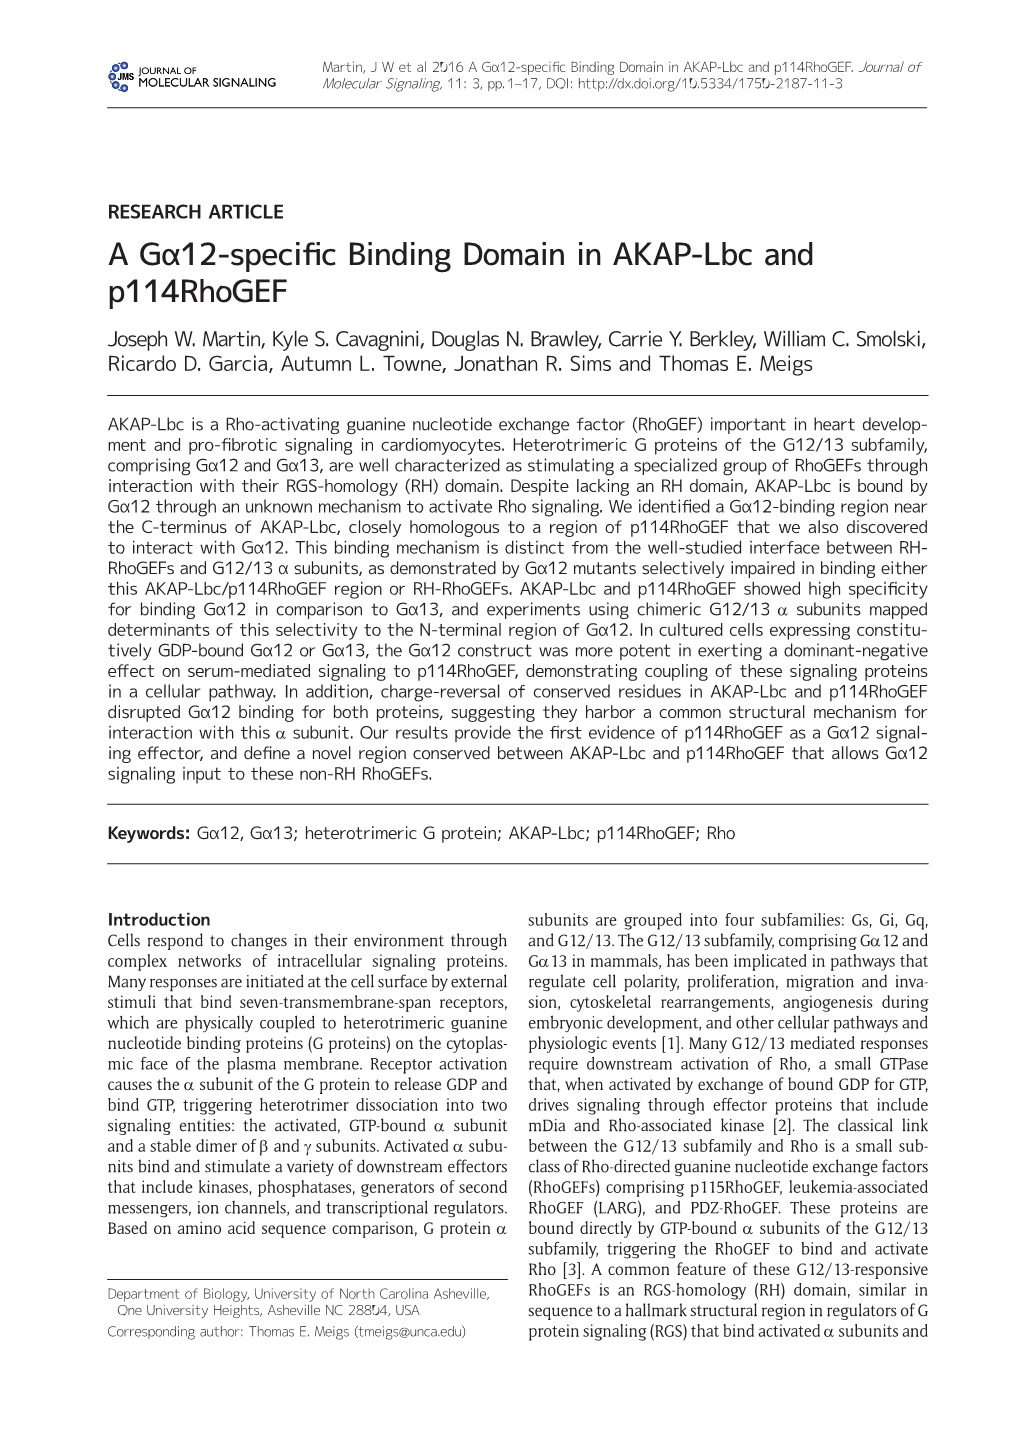 A Gα12-Specific Binding Domain in AKAP-Lbc and P114rhogef.Journal of Molecular Signaling, 11: 3, Pp